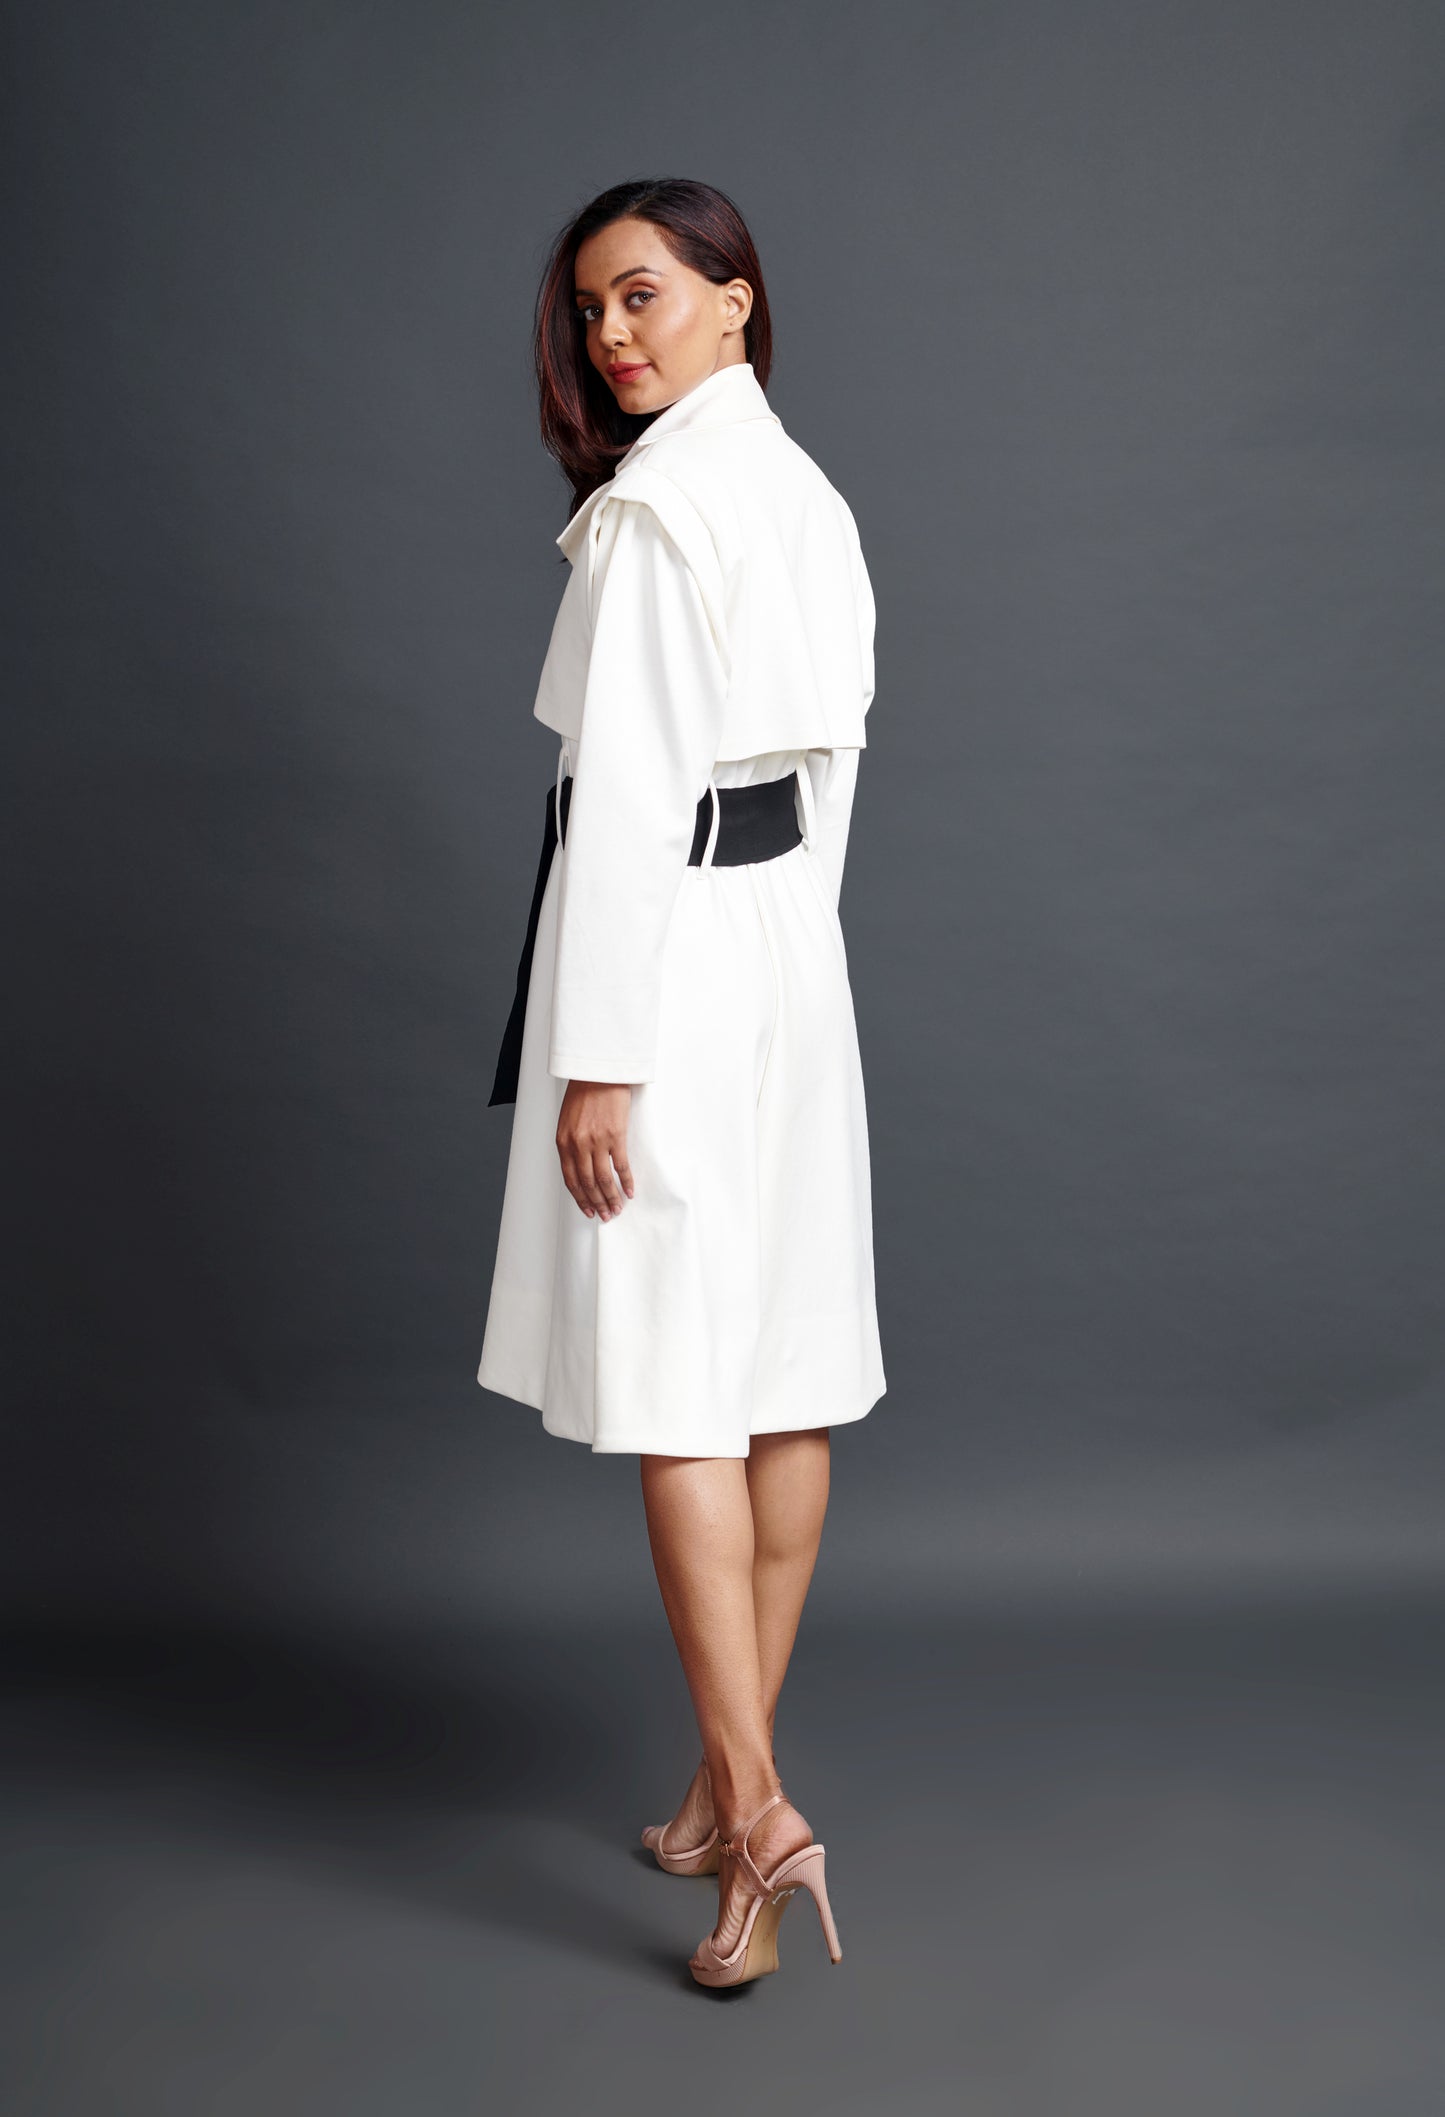 Image of WHITE A SUMURAI INSPIRED JACKET DRESS WITH SASH BELT. From savoirfashions.com